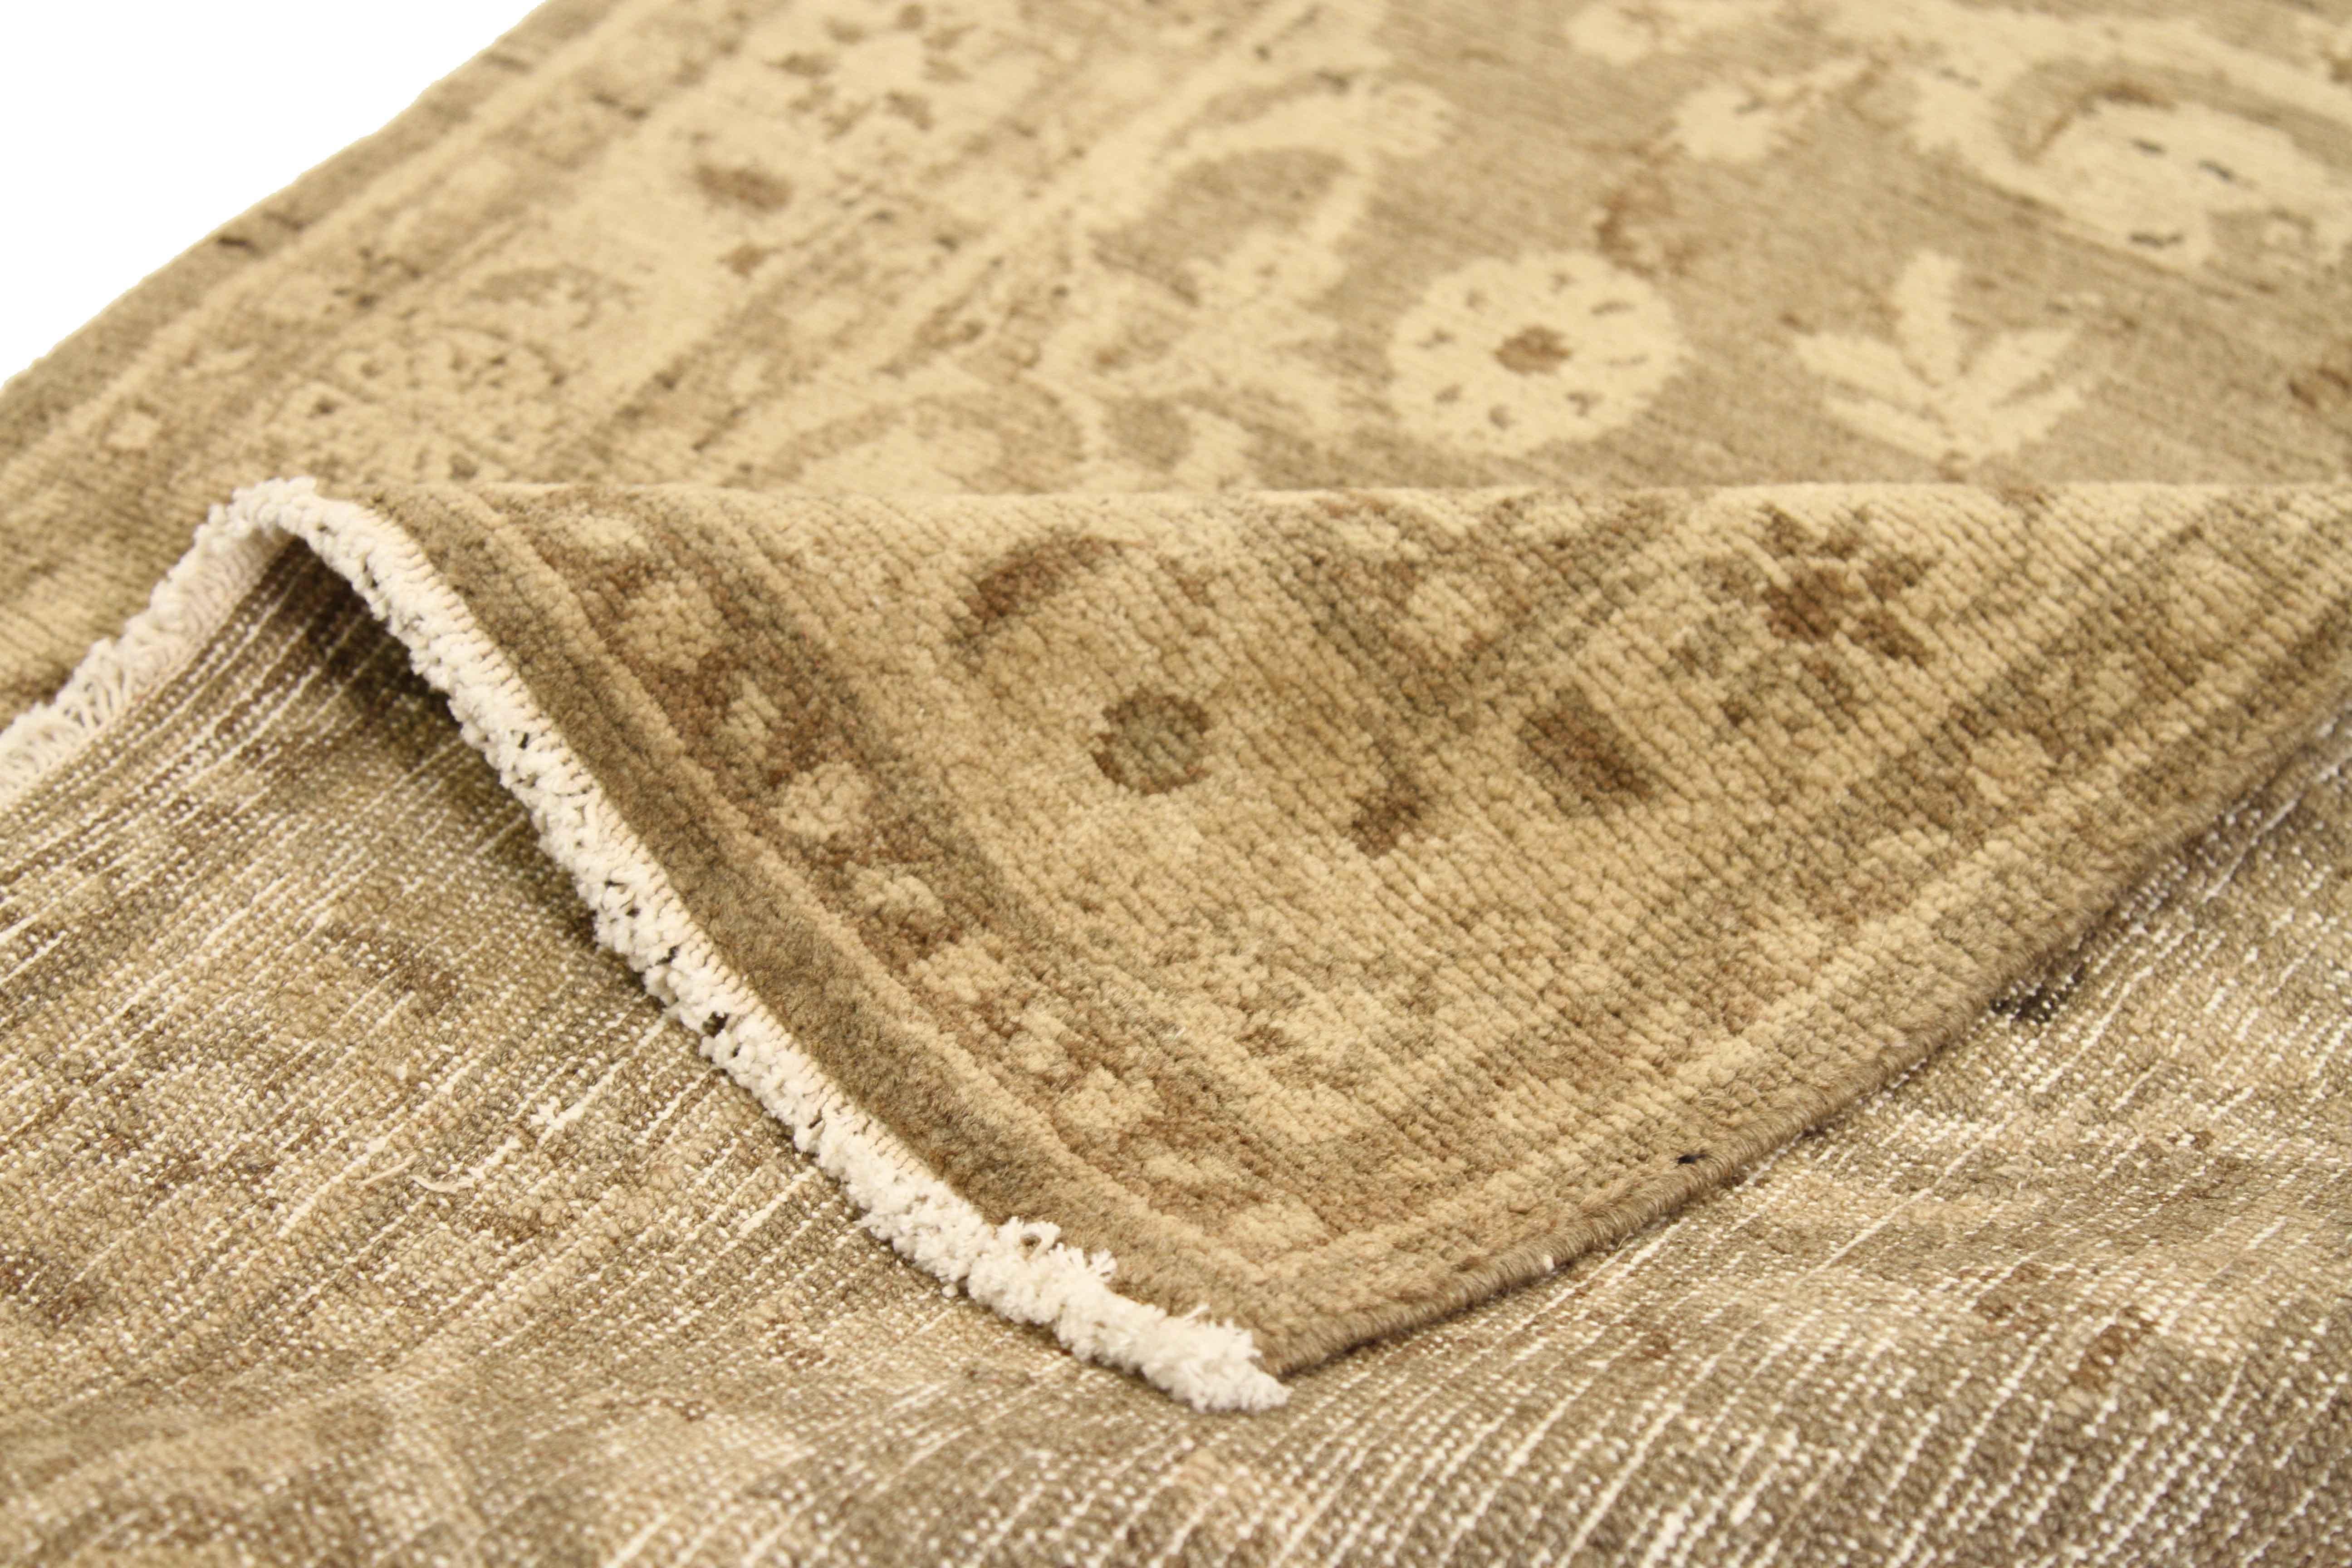 Made from the finest quality of natural wool and vegetable dye, this antique Persian rug is certified organic and eco-friendly. Its muted brown and beige color mix is perfect for coastal or Hamptons-style homes as well as rustic and shabby chic